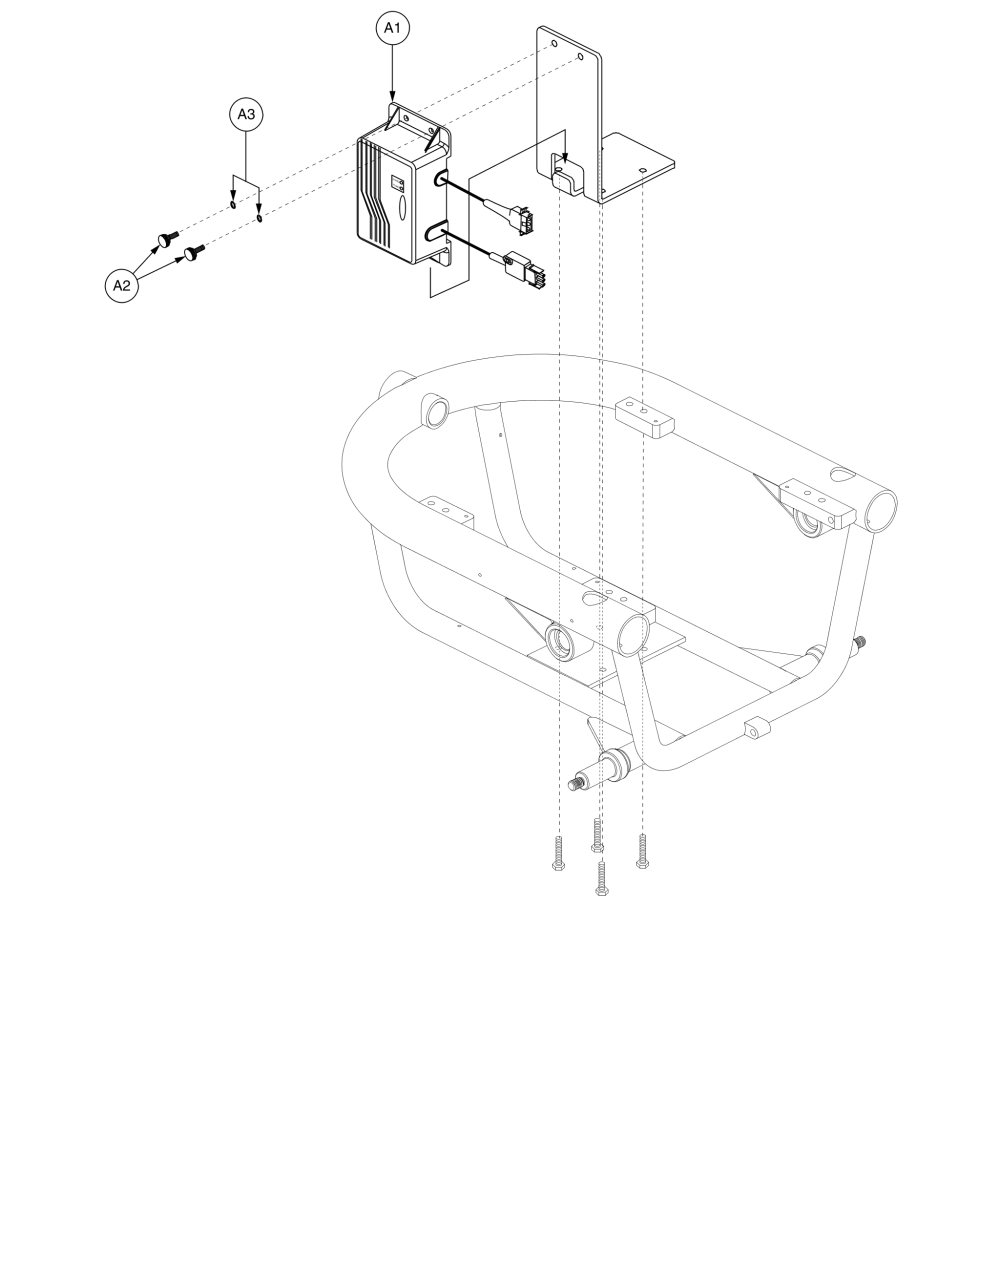 Onboard Charger Assembly, Actuator Mounted, Jazzy 610 / 1103 Ultra parts diagram